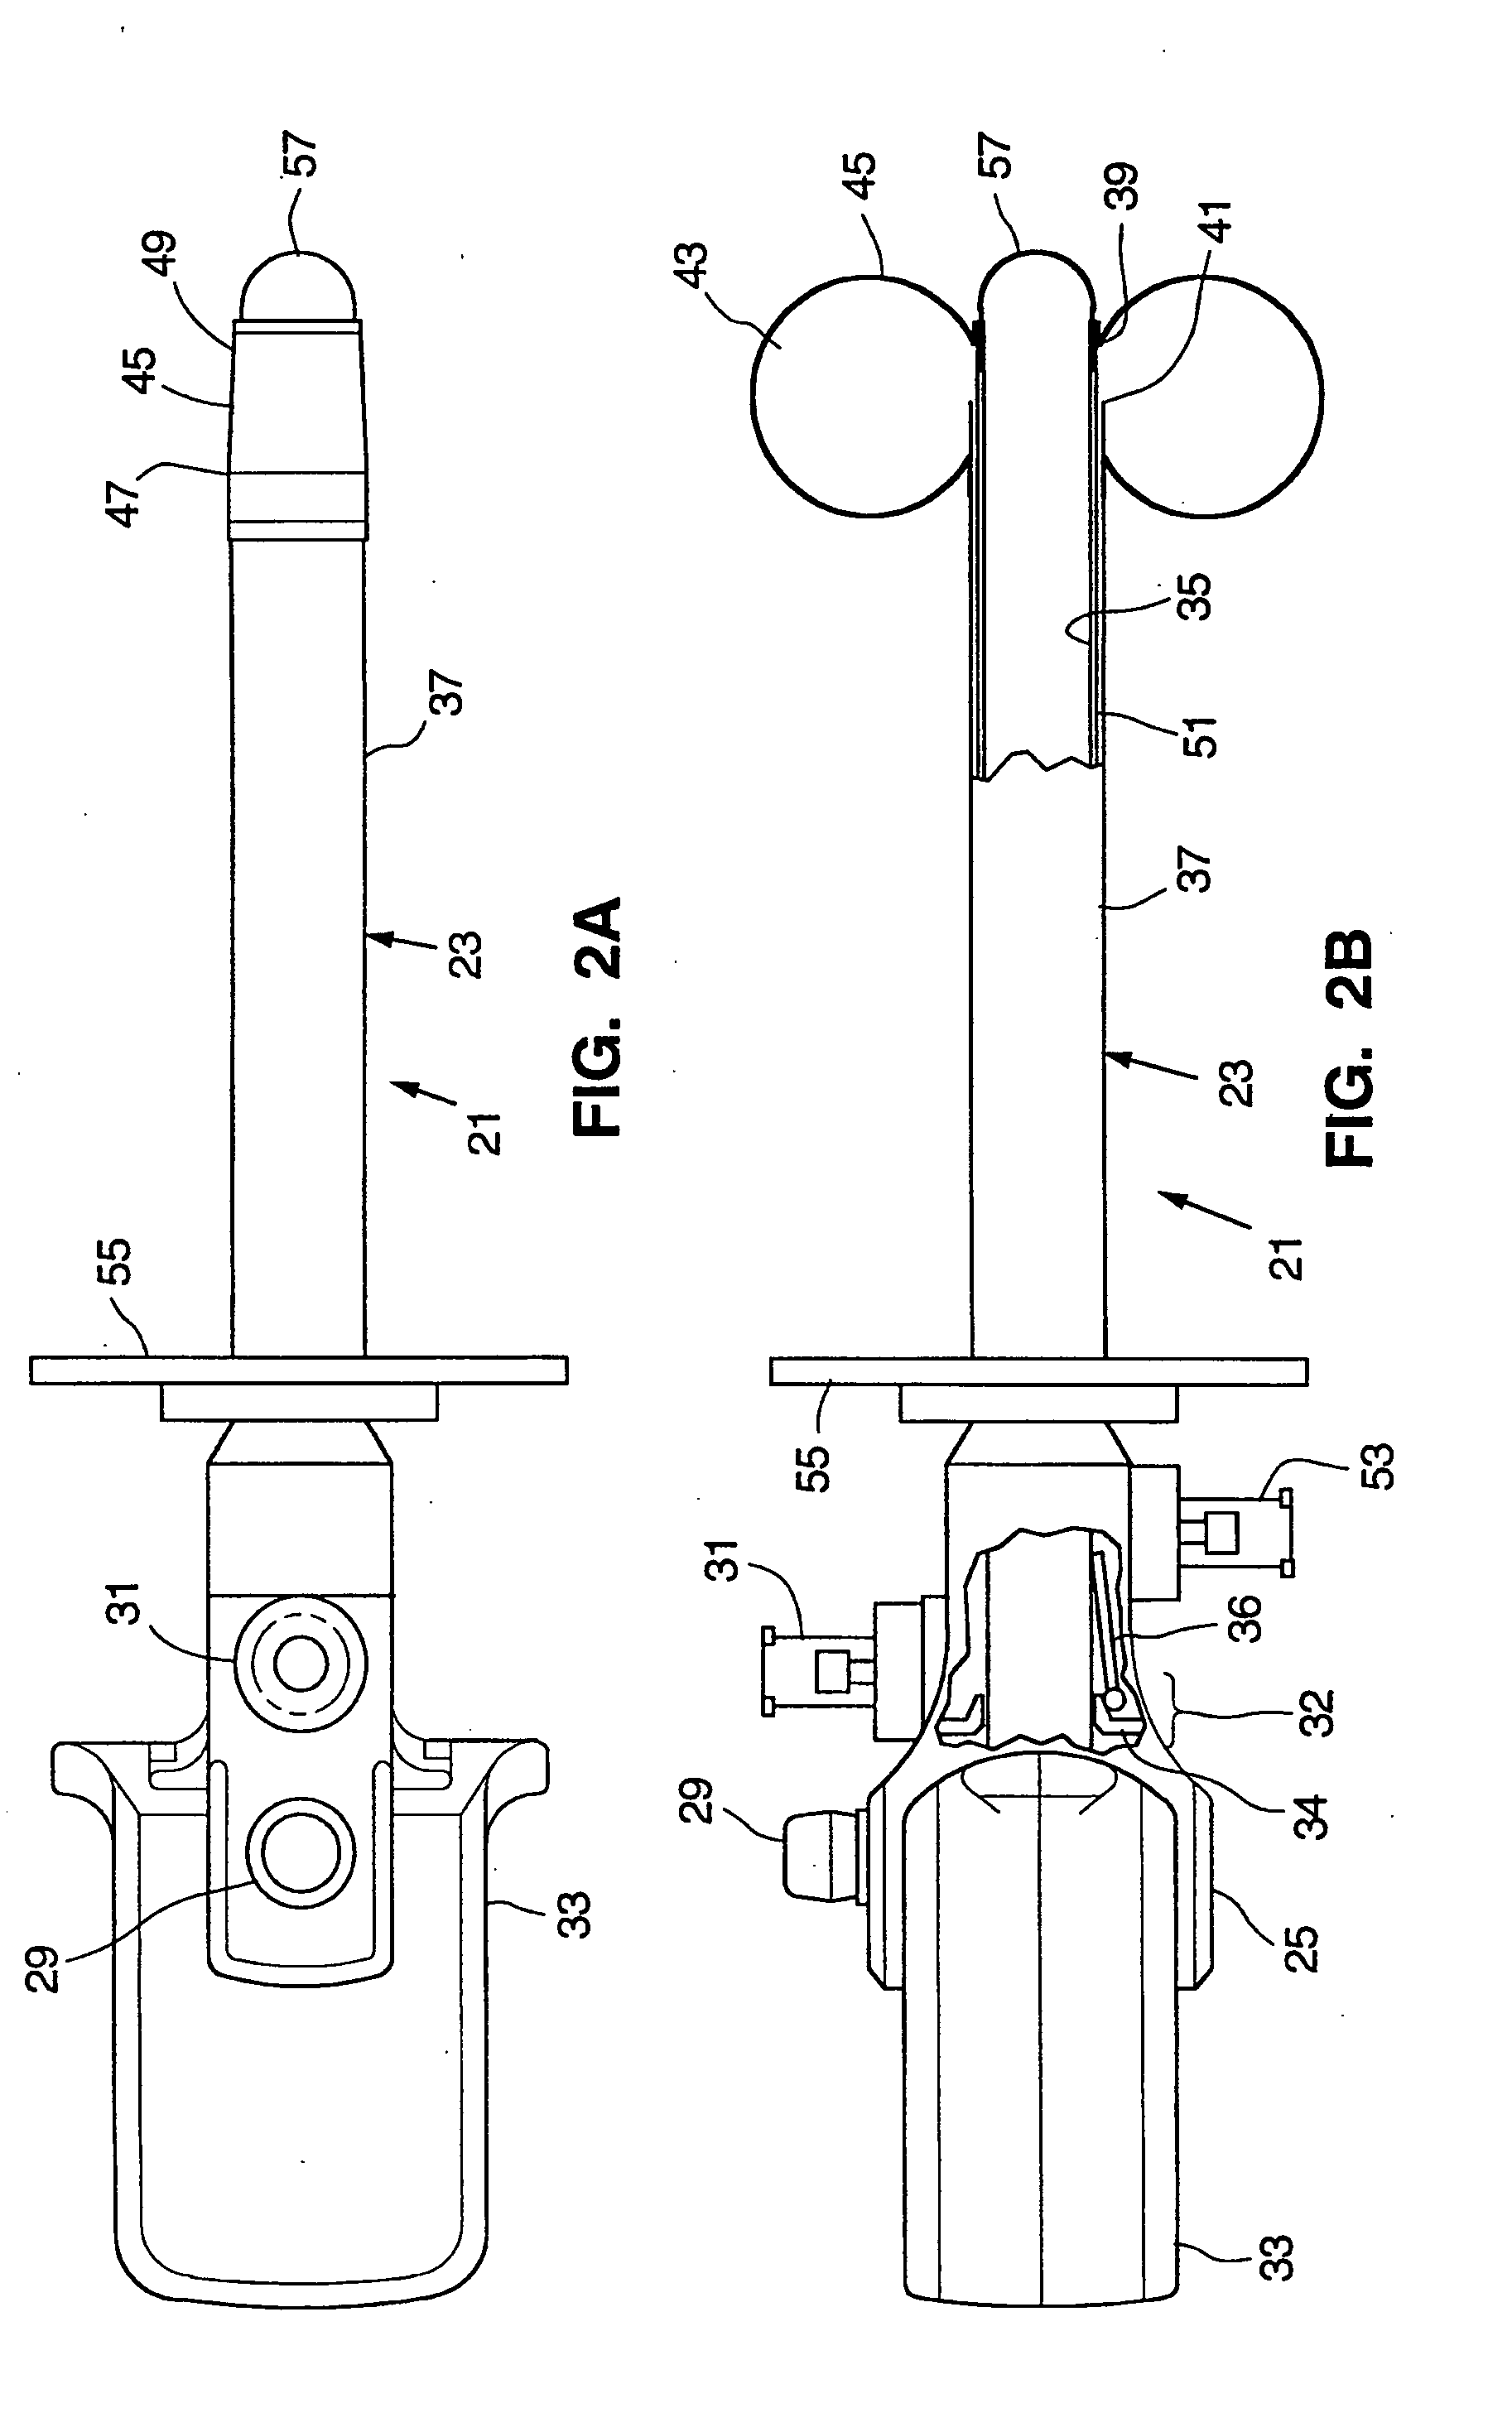 Method and inflatable chamber apparatus for separating layers of tissue